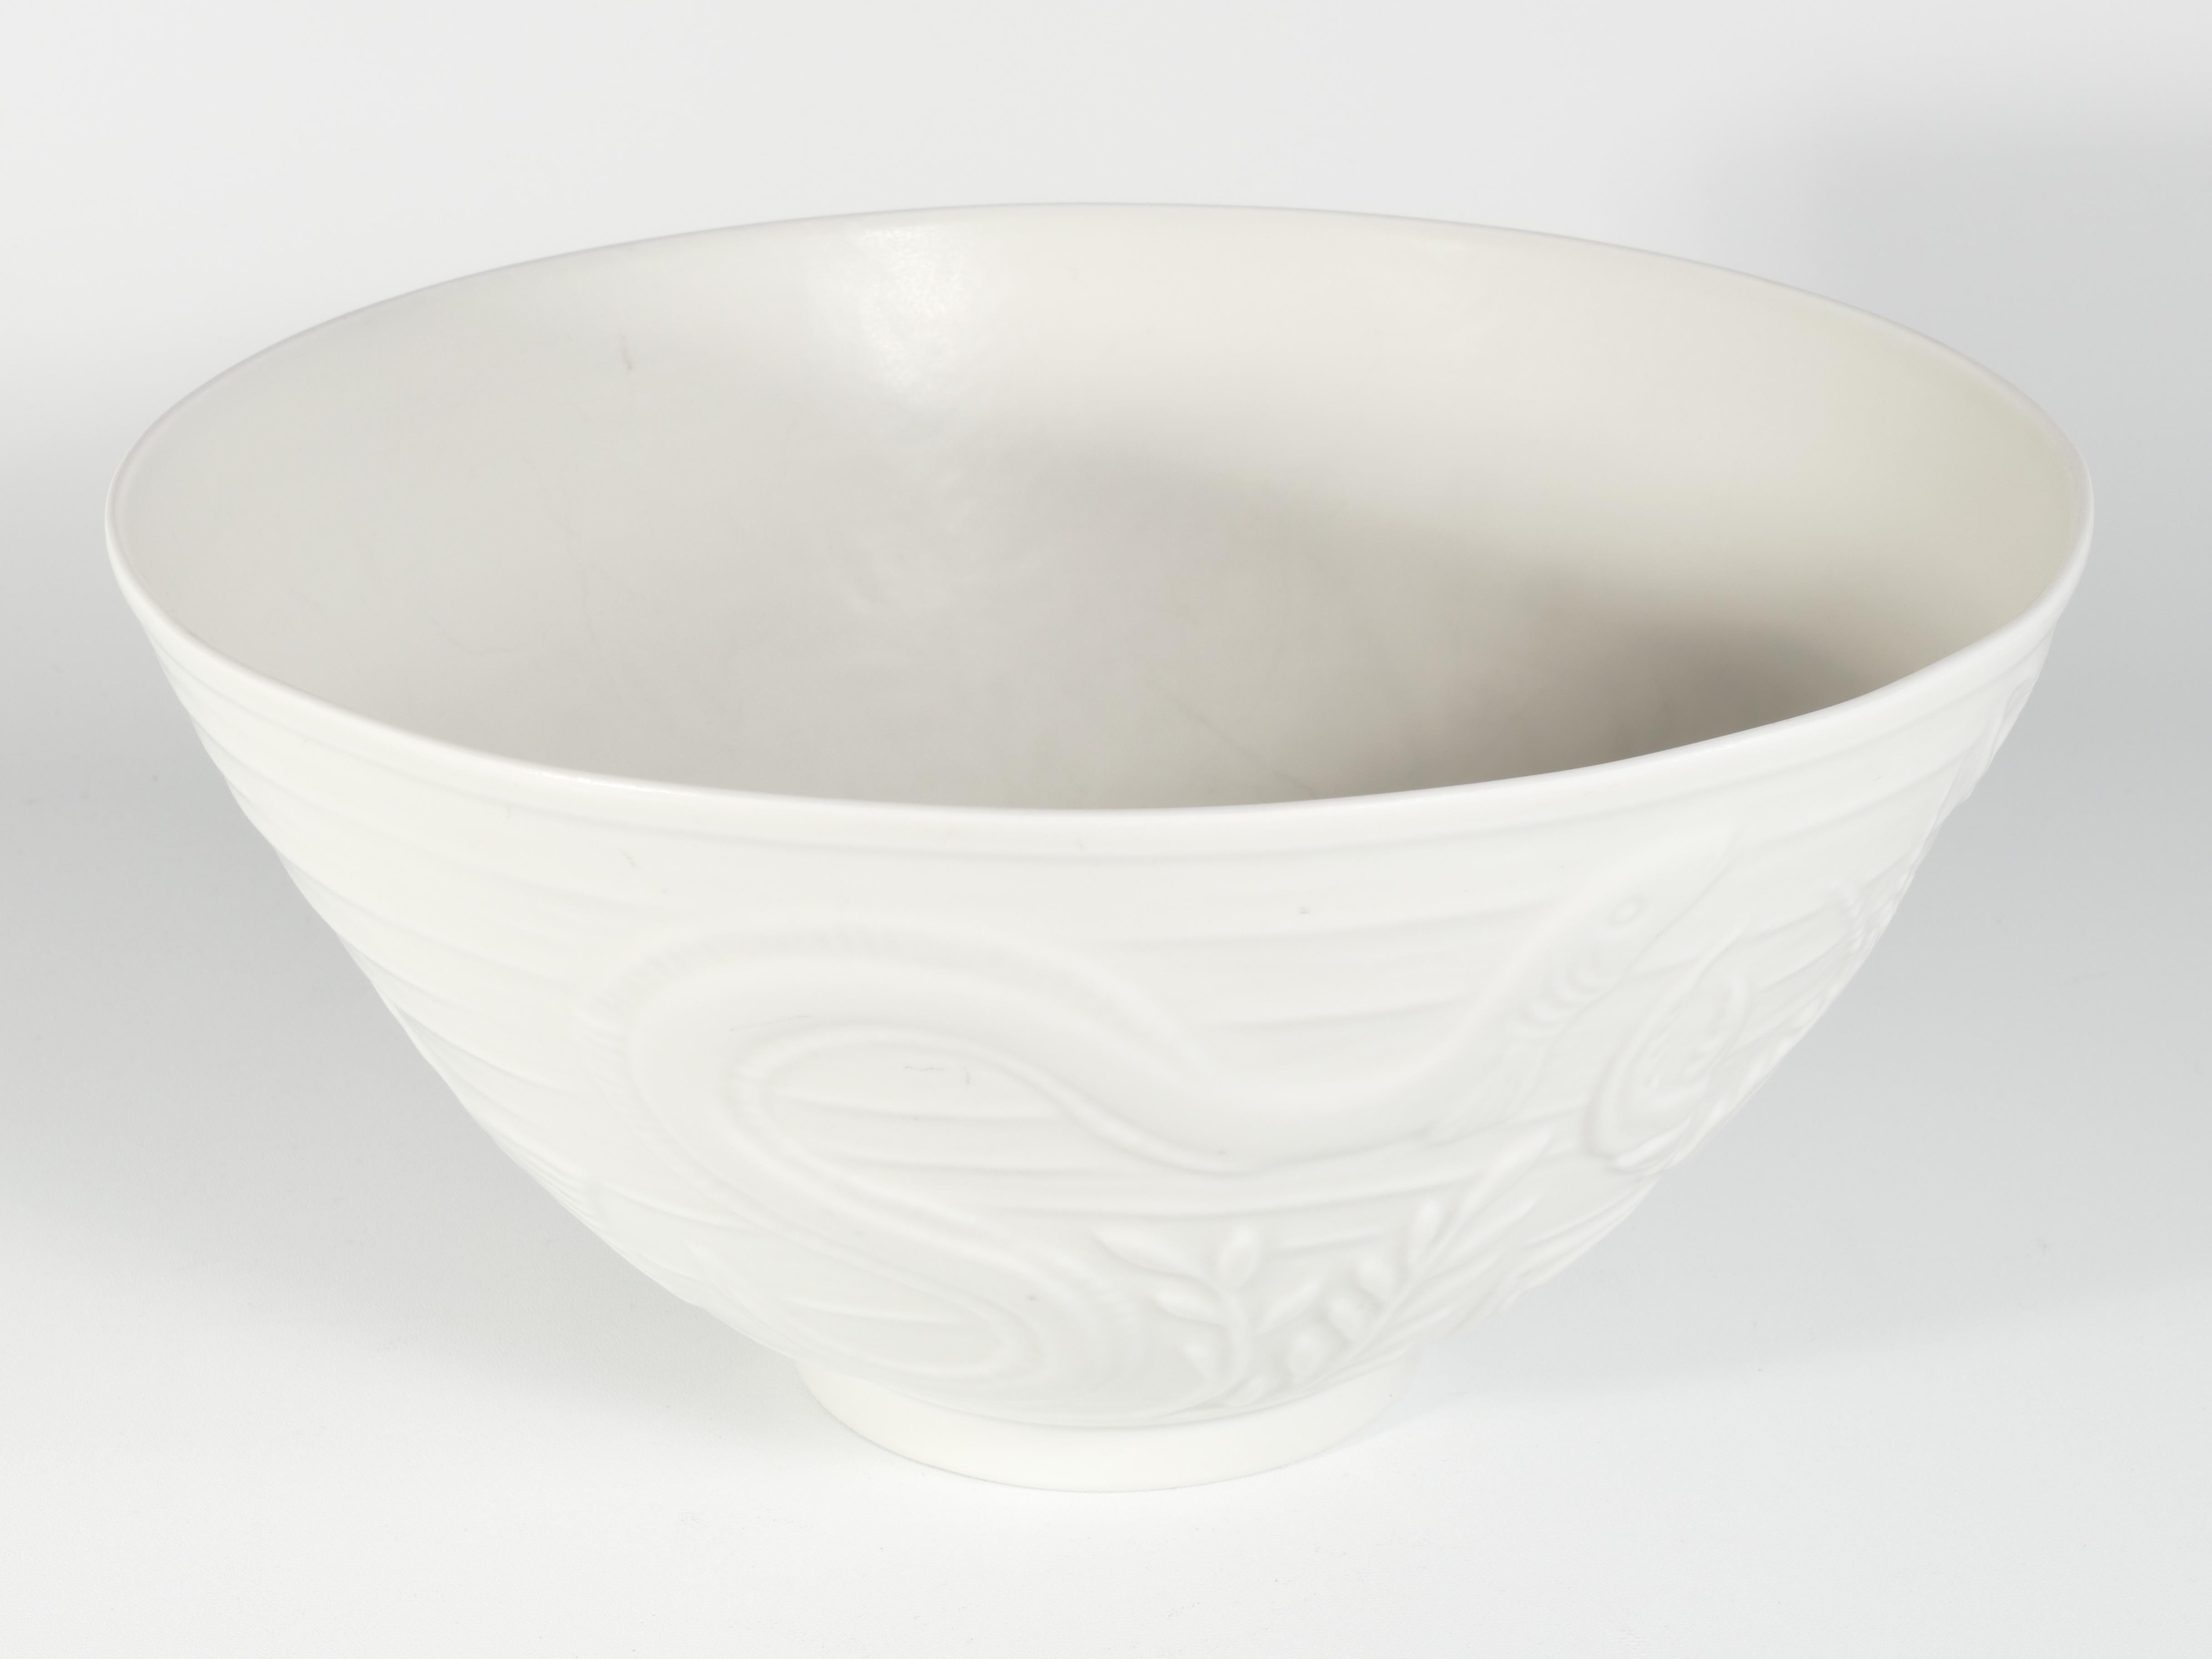 Swedish Grace White Porcelain Sea Themed  Bowl by Gunnar Nylund for ALP, 1940's For Sale 5